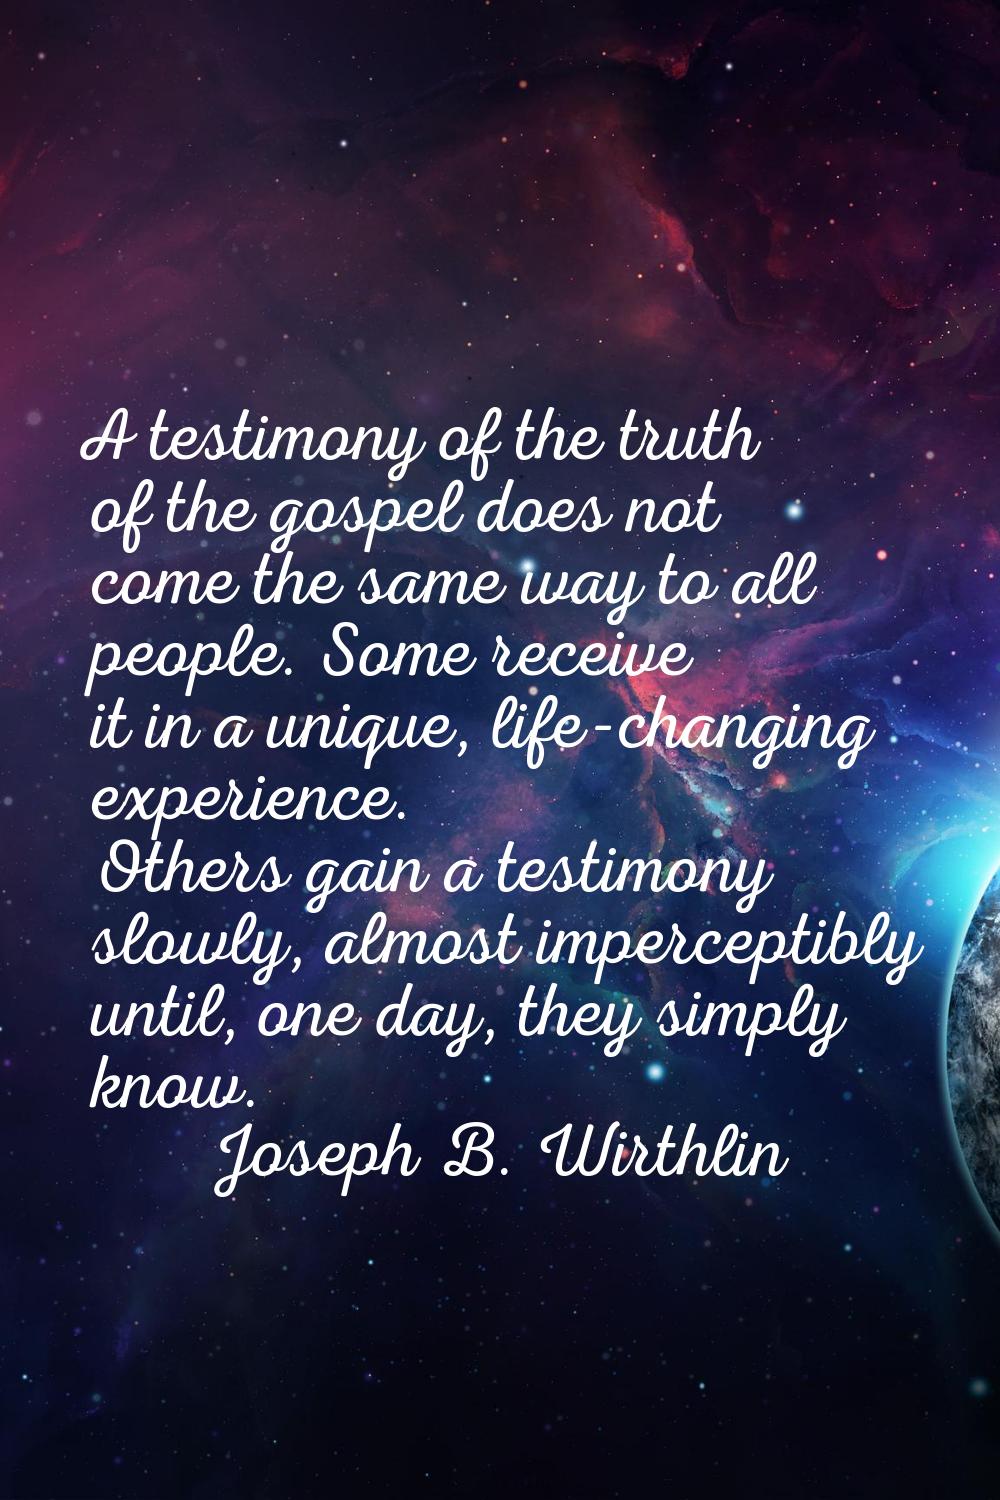 A testimony of the truth of the gospel does not come the same way to all people. Some receive it in